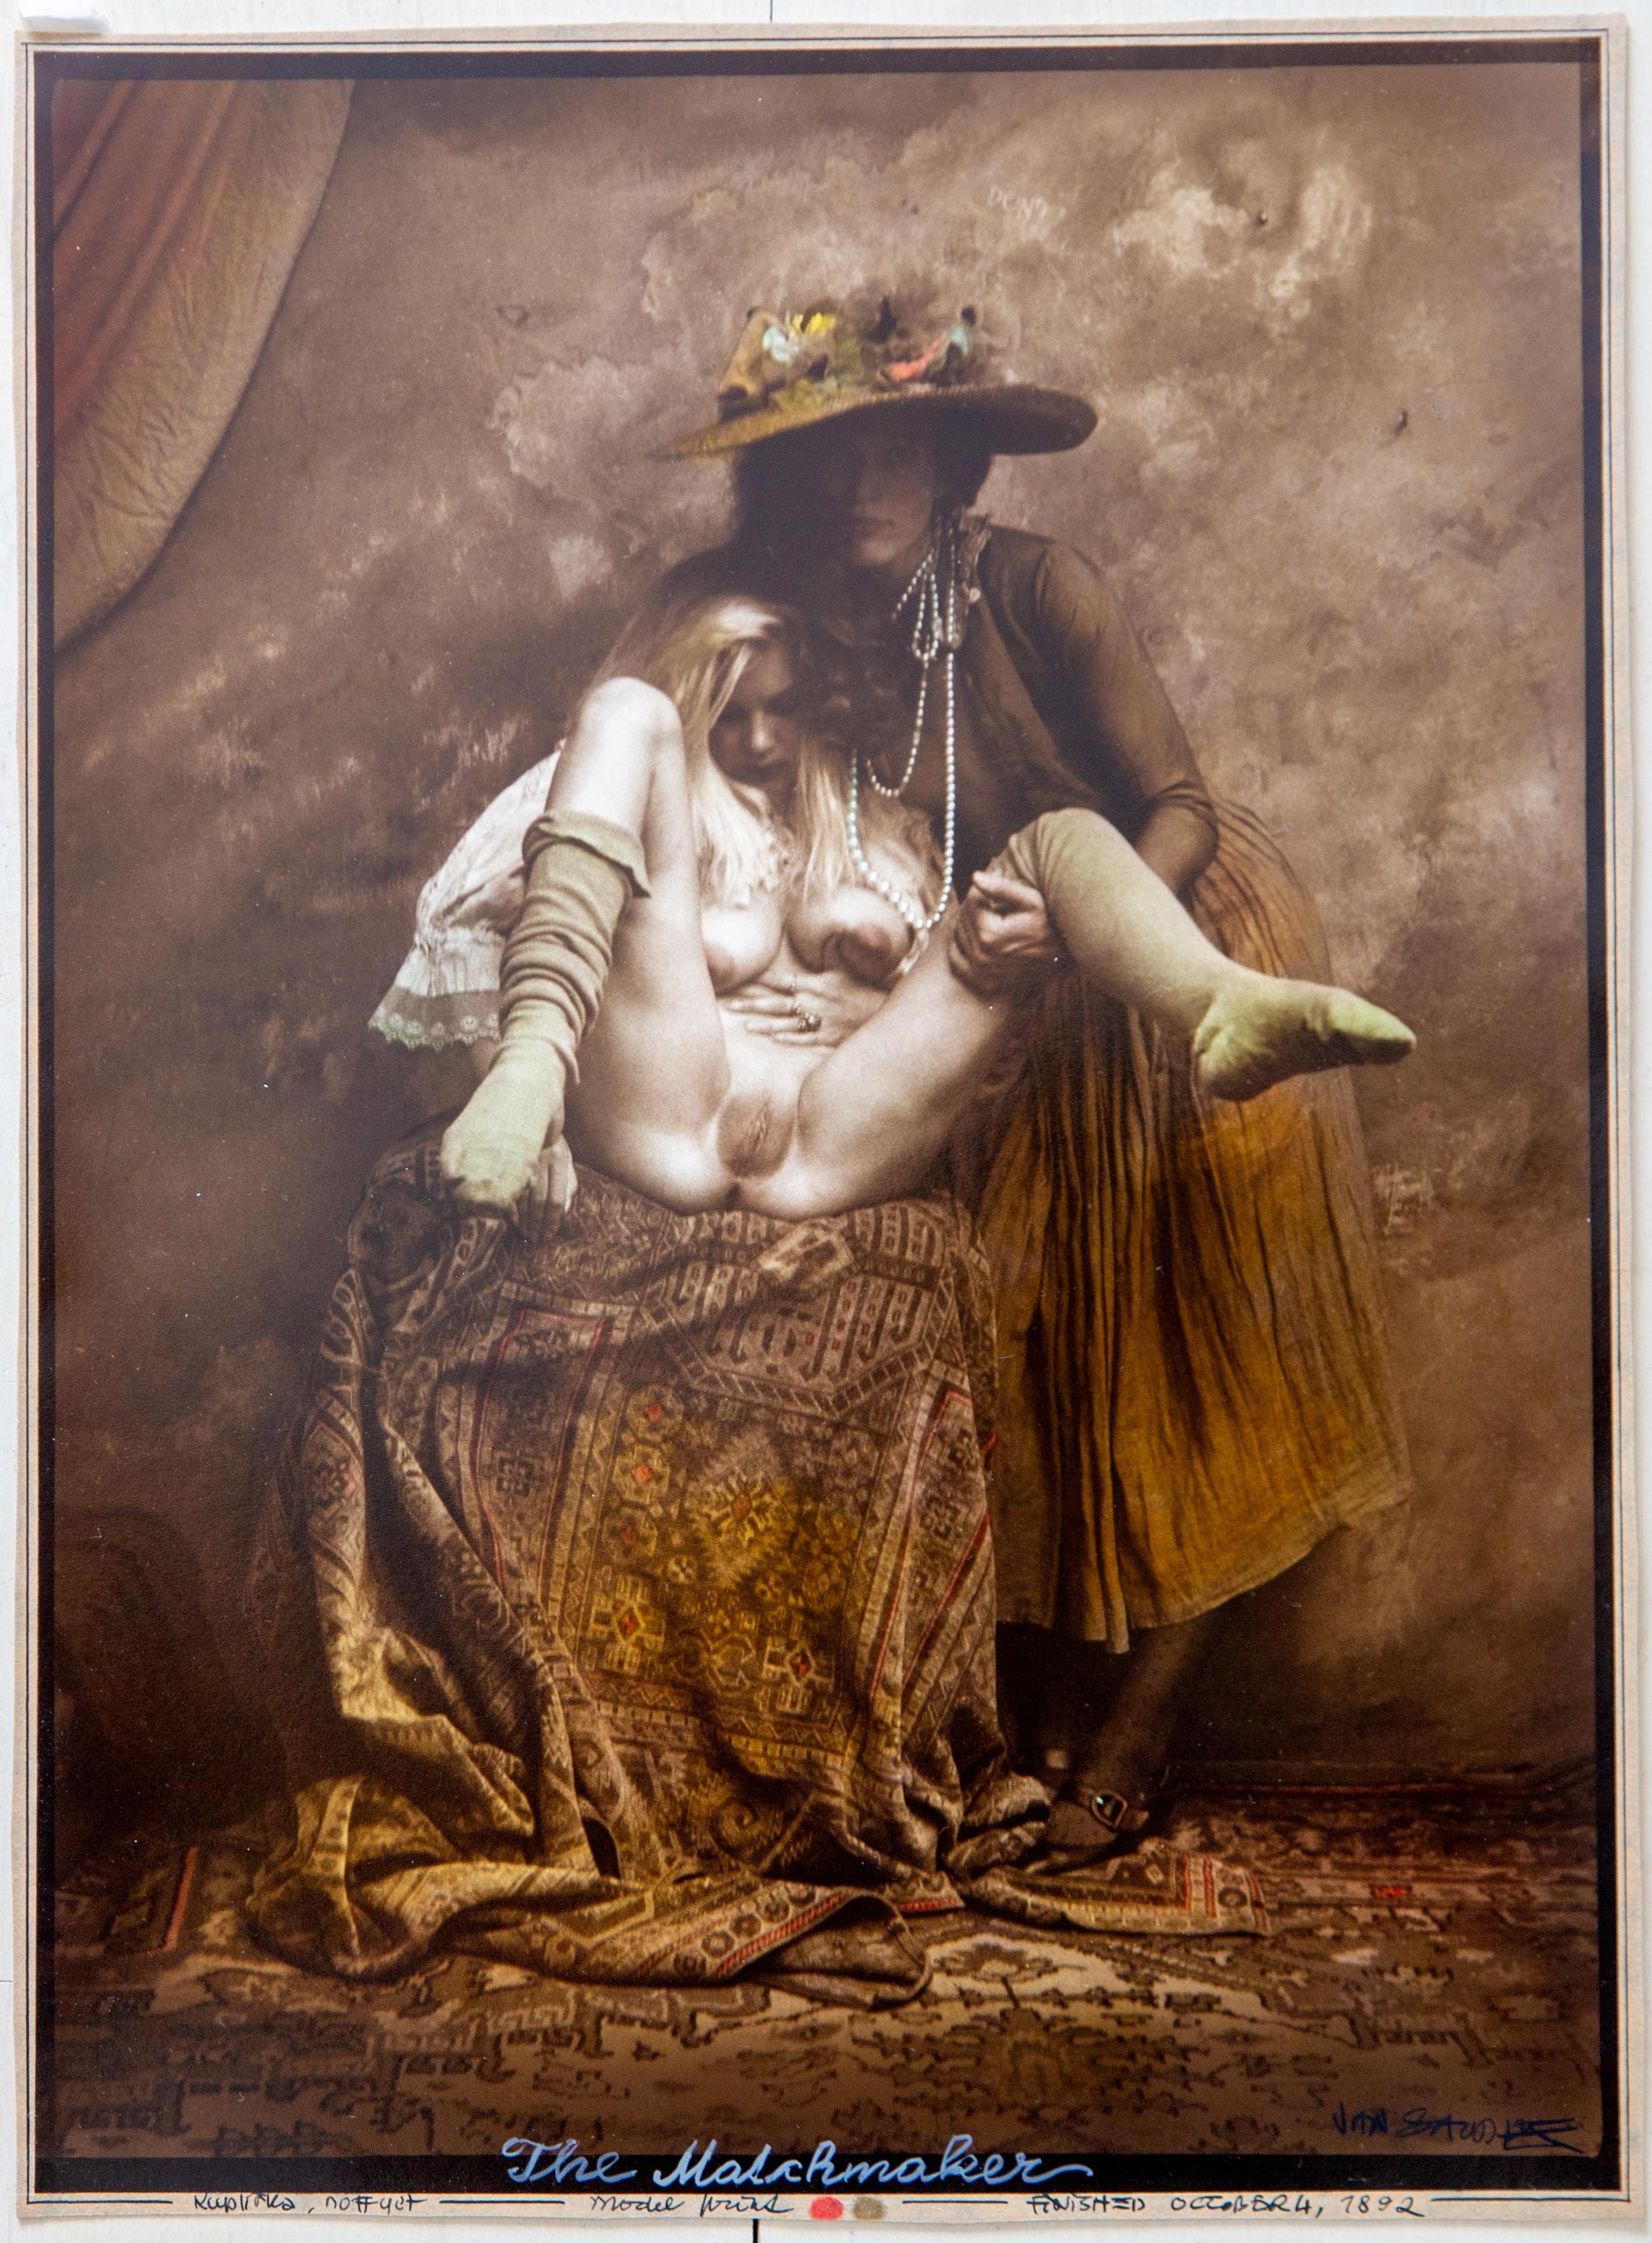 Artwork by Jan Saudek, The Matchmaker, Made of gelatin silver print with hand-colouring